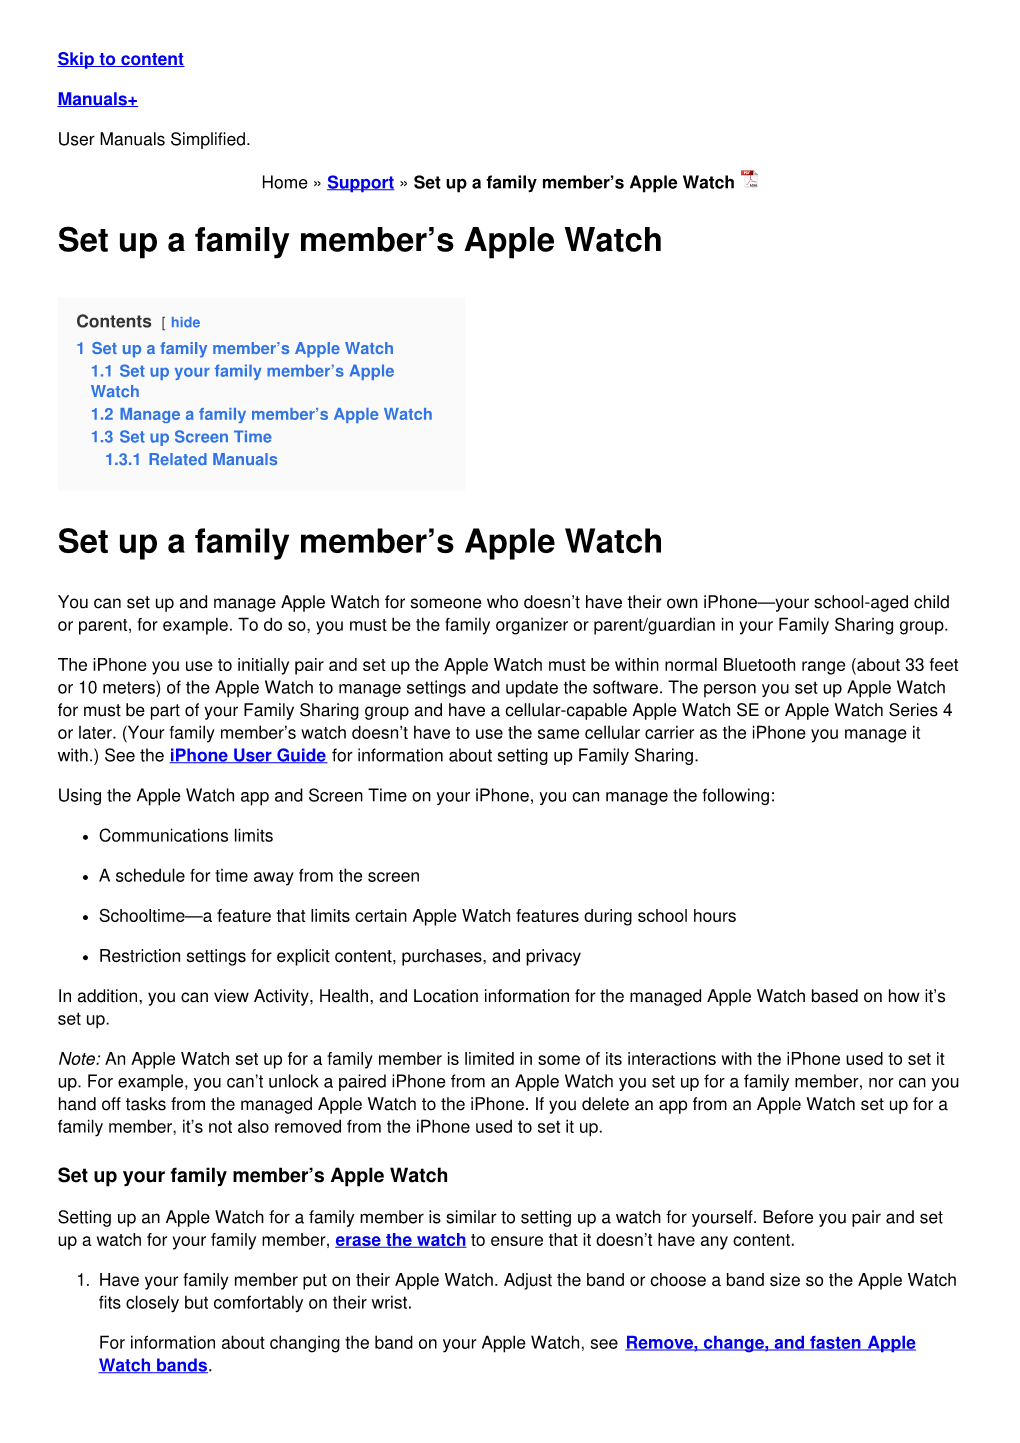 Set up a Family Member's Apple Watch